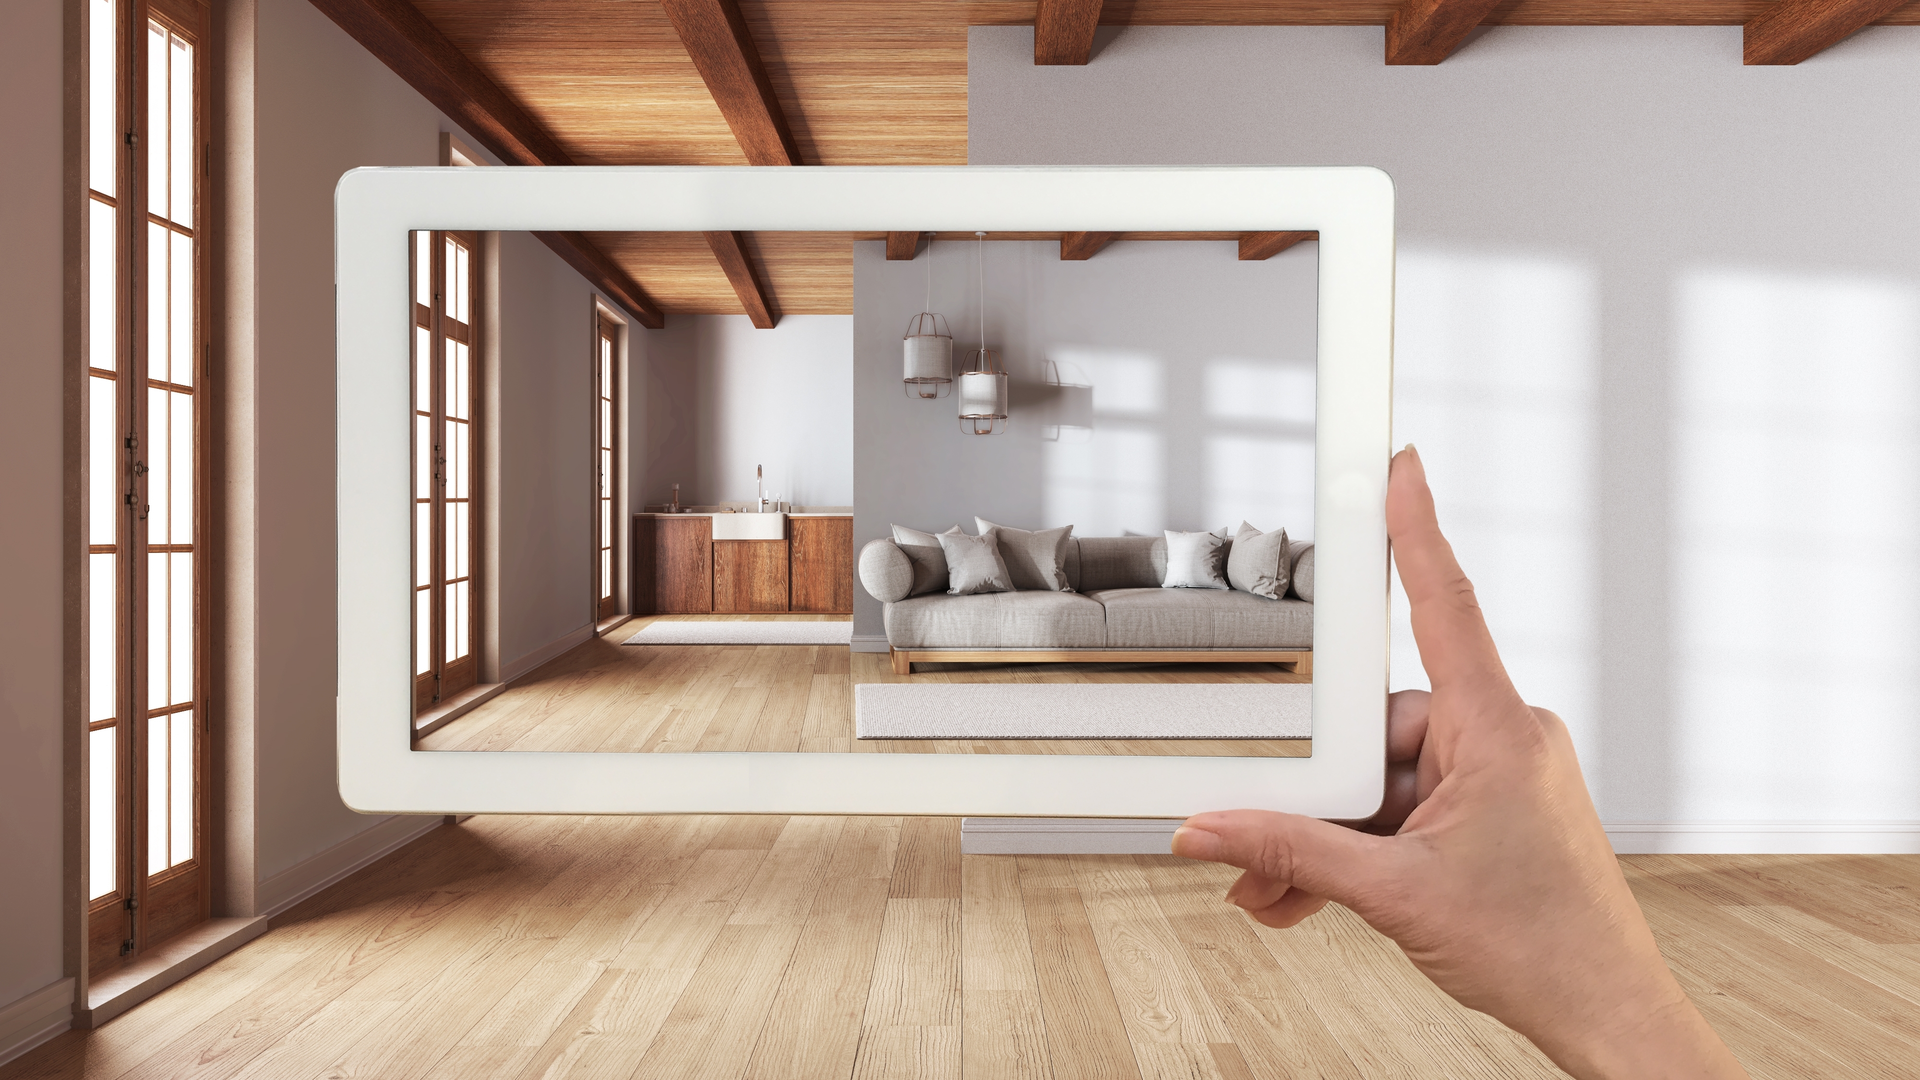 room with augmented reality device showing digital furniture in place